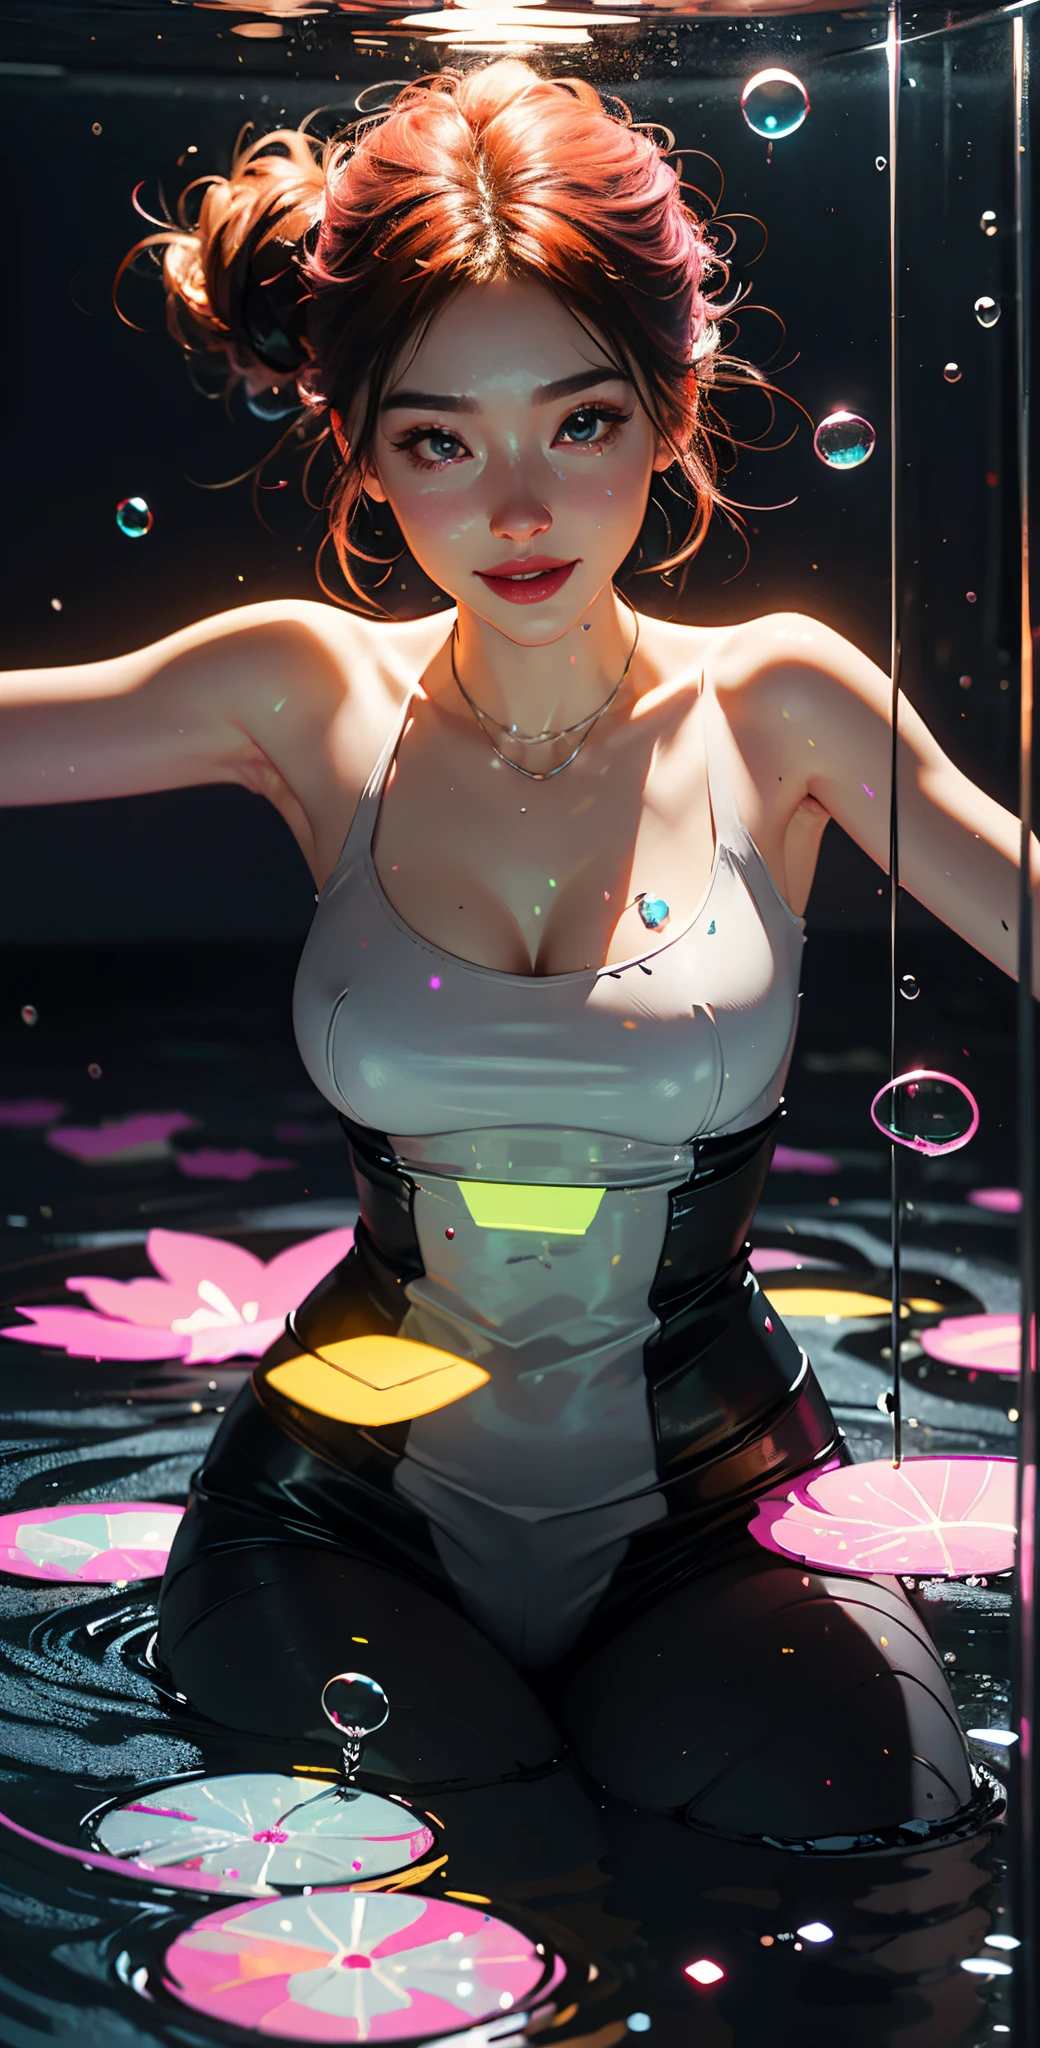 a glowing head made of glass and a glowing body made of glass, beautiful face, detail face, full body (breast), long legs, nice smile, good arms and hands, pink neon glowing lights, water bubbles, amazing particles pulling out of the glass head and body, like droplets of glass floating, 8k highly detailed digital art, intricate artwork, octane render, mind-bending digital art, breathtaking digital art, 3d digital art, 8k hd wallpaper, volumetric lighting, highly reflective glass particles